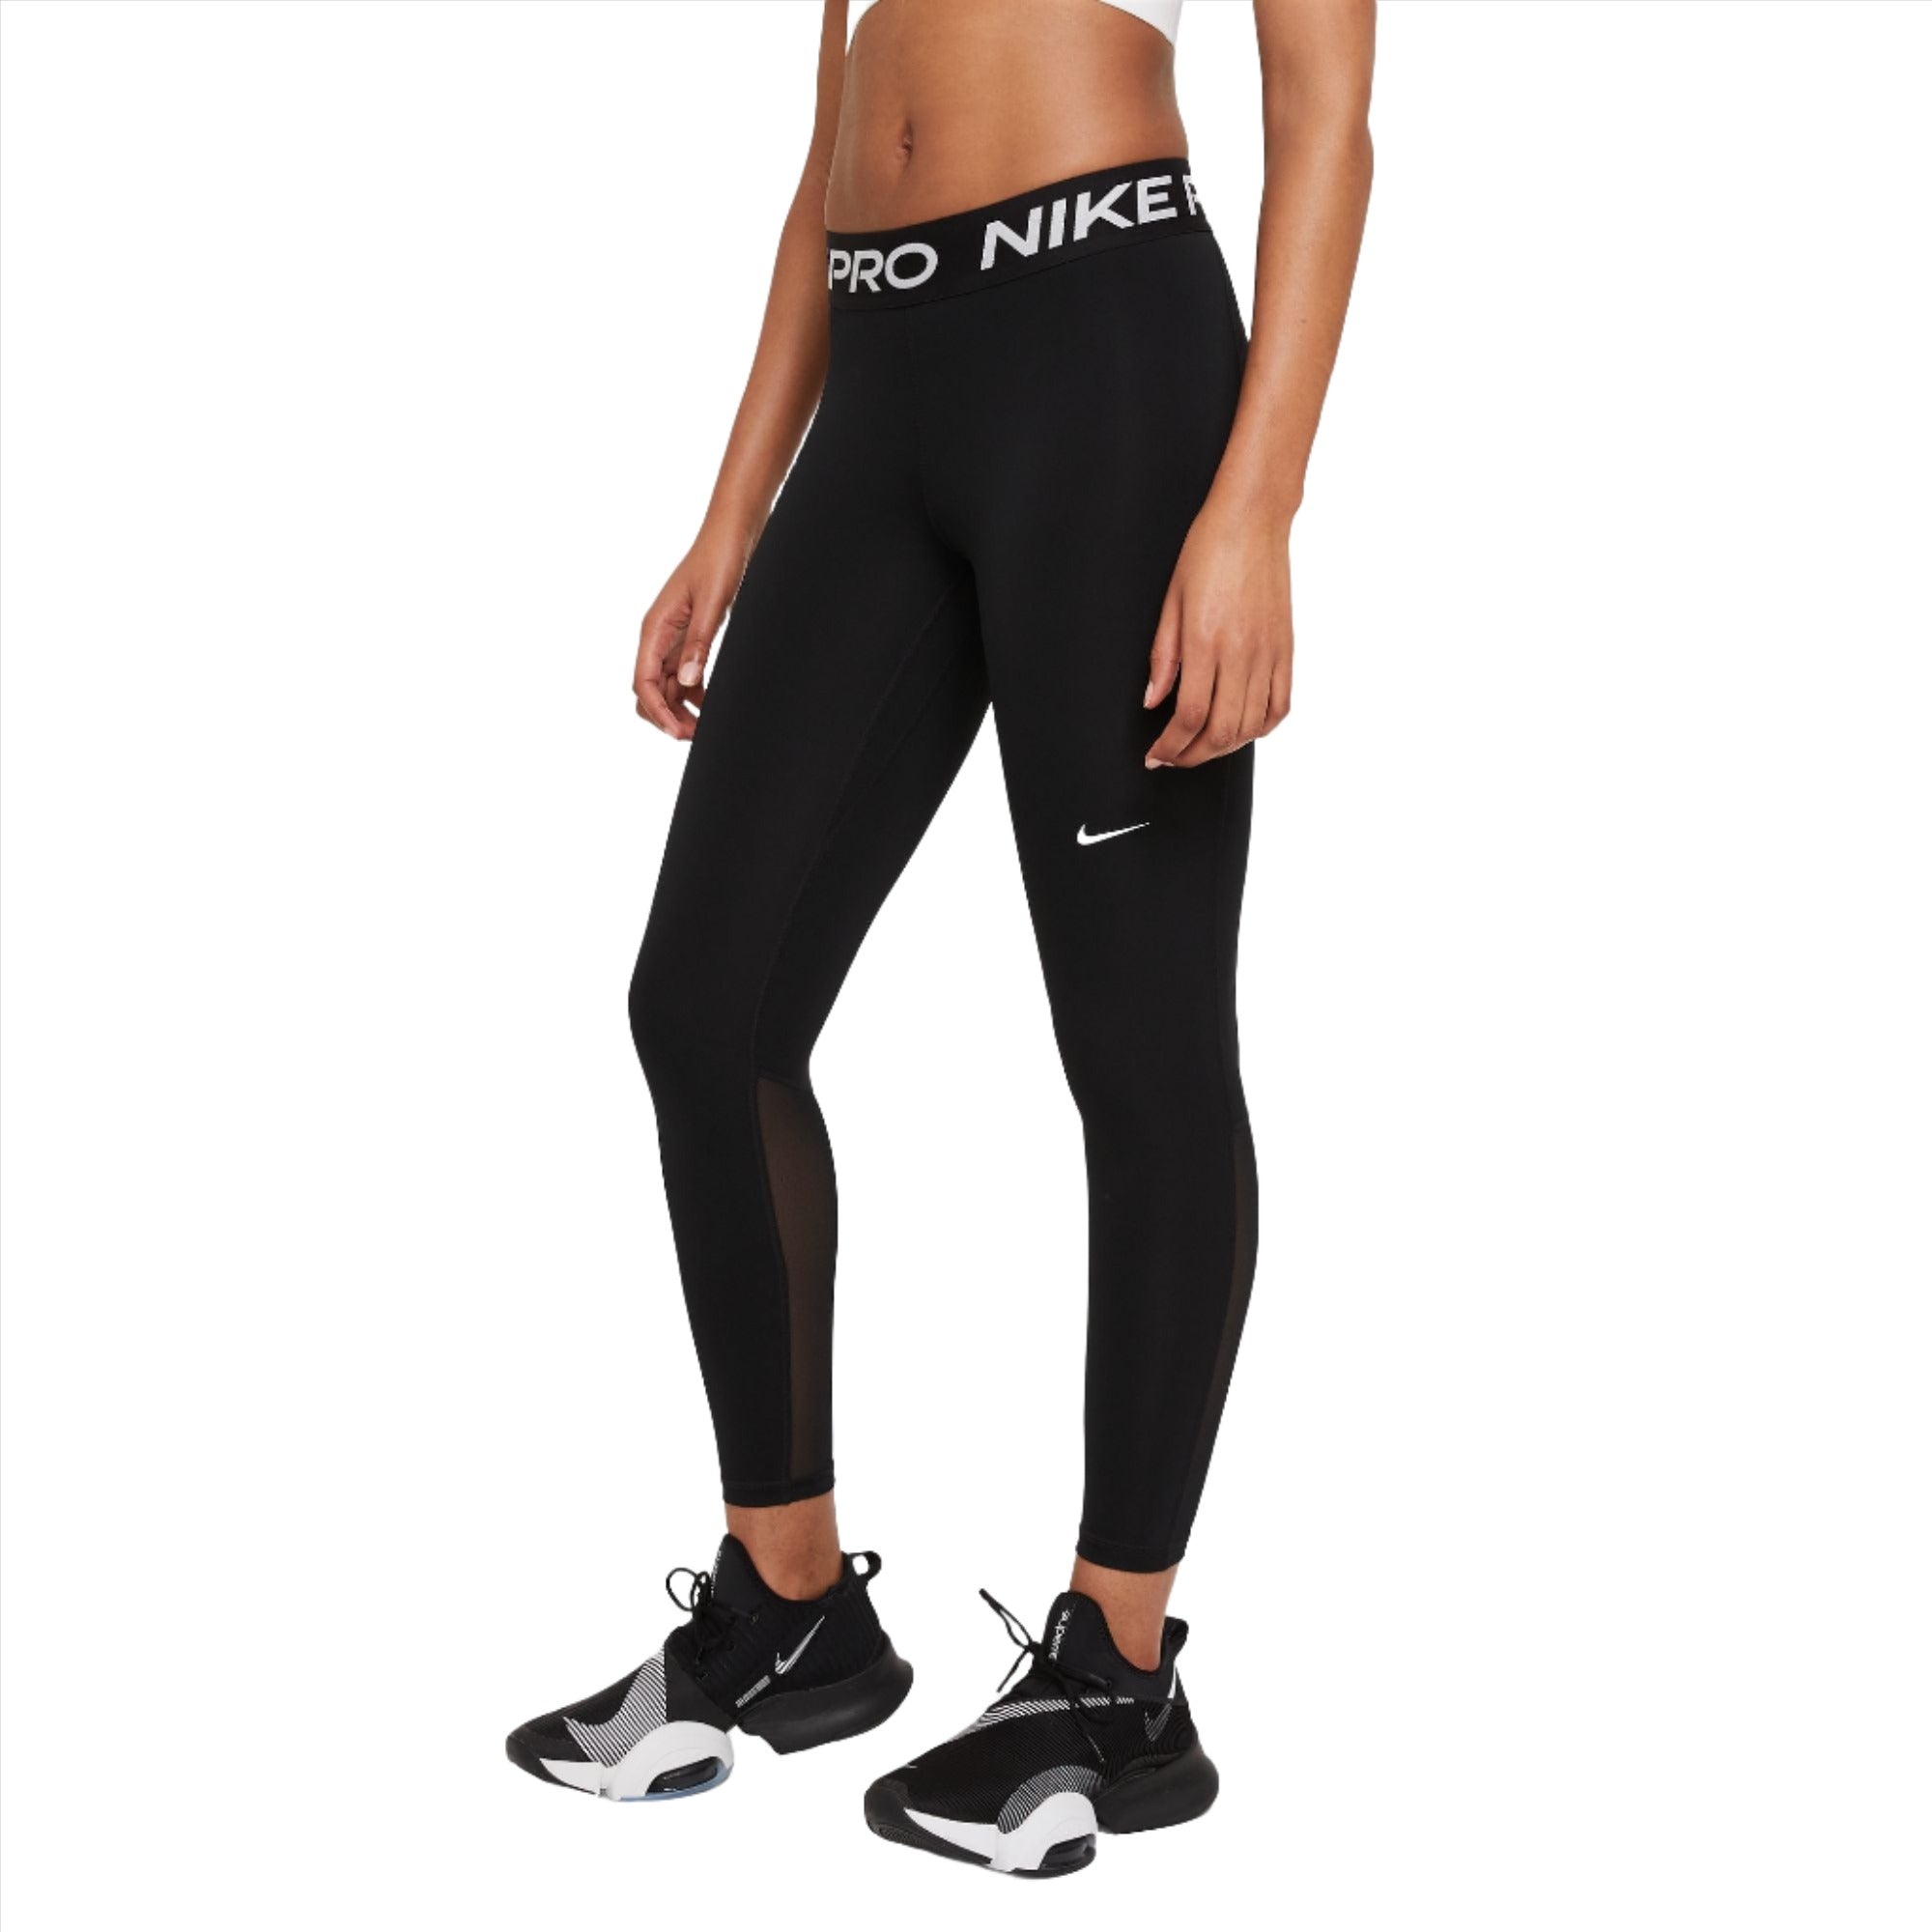 Pro Women's Mid-Rise Tights